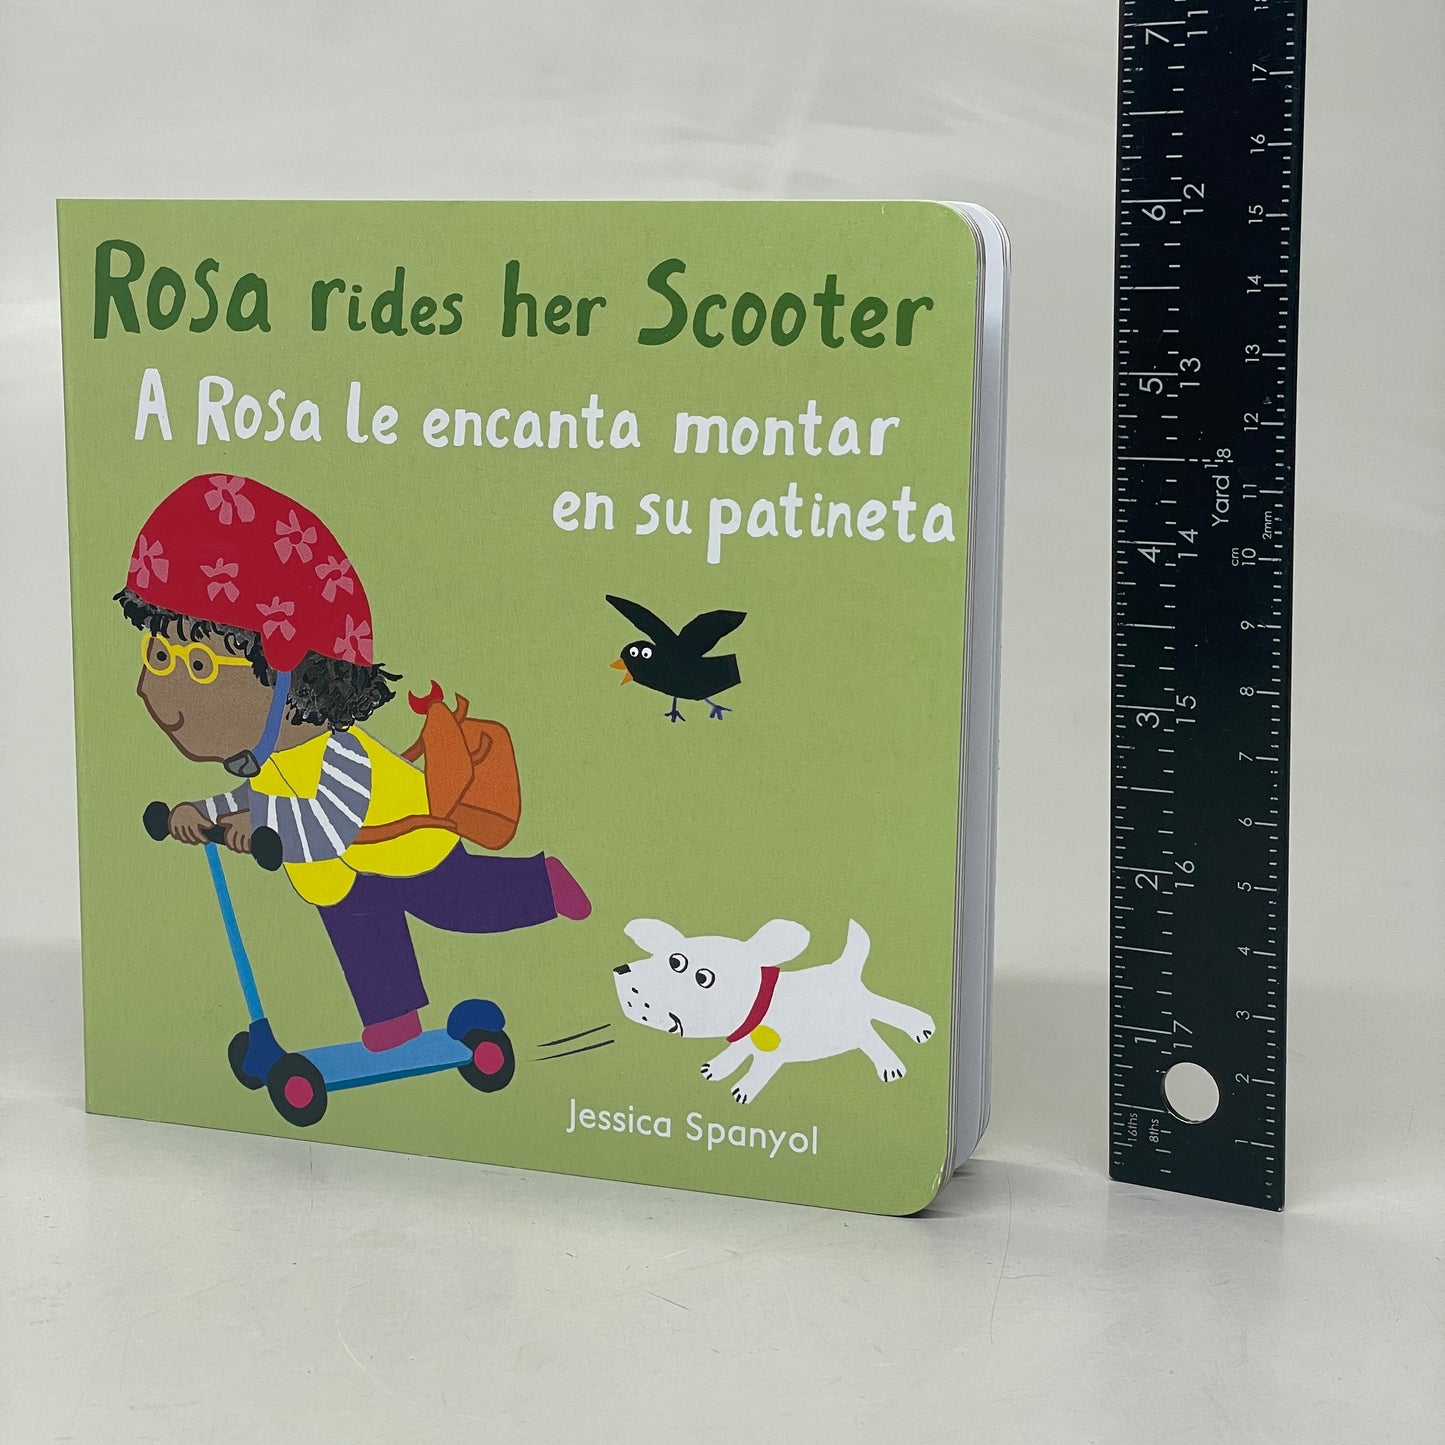 ROSA RIDES HER SCOOTER (Lot of 3) English & Spanish By Jessica Spanyal